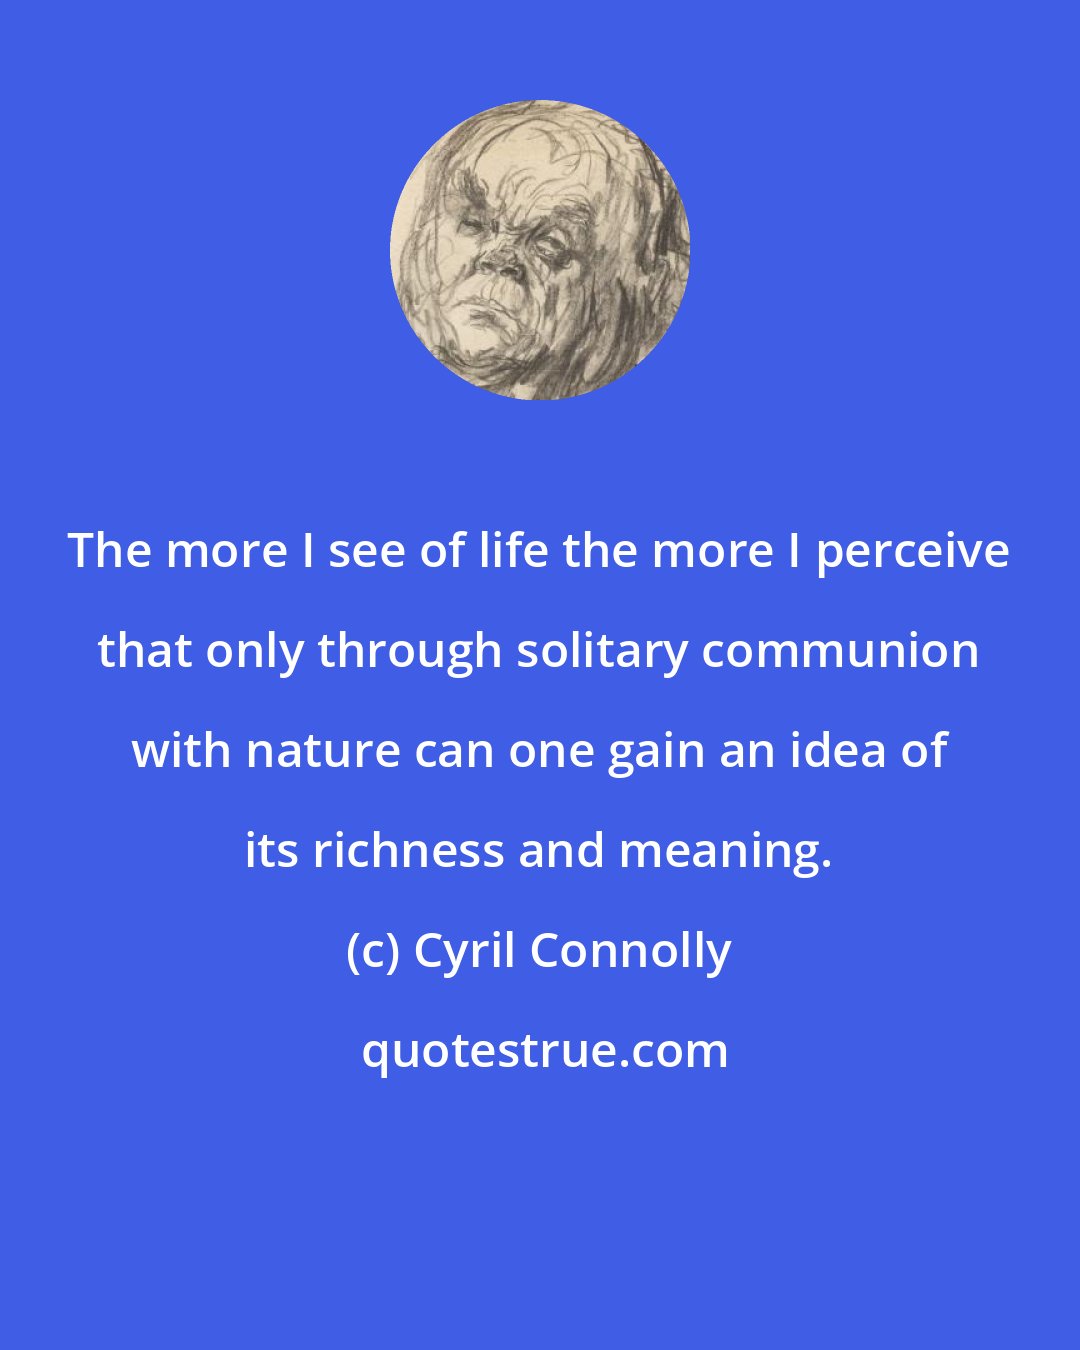 Cyril Connolly: The more I see of life the more I perceive that only through solitary communion with nature can one gain an idea of its richness and meaning.